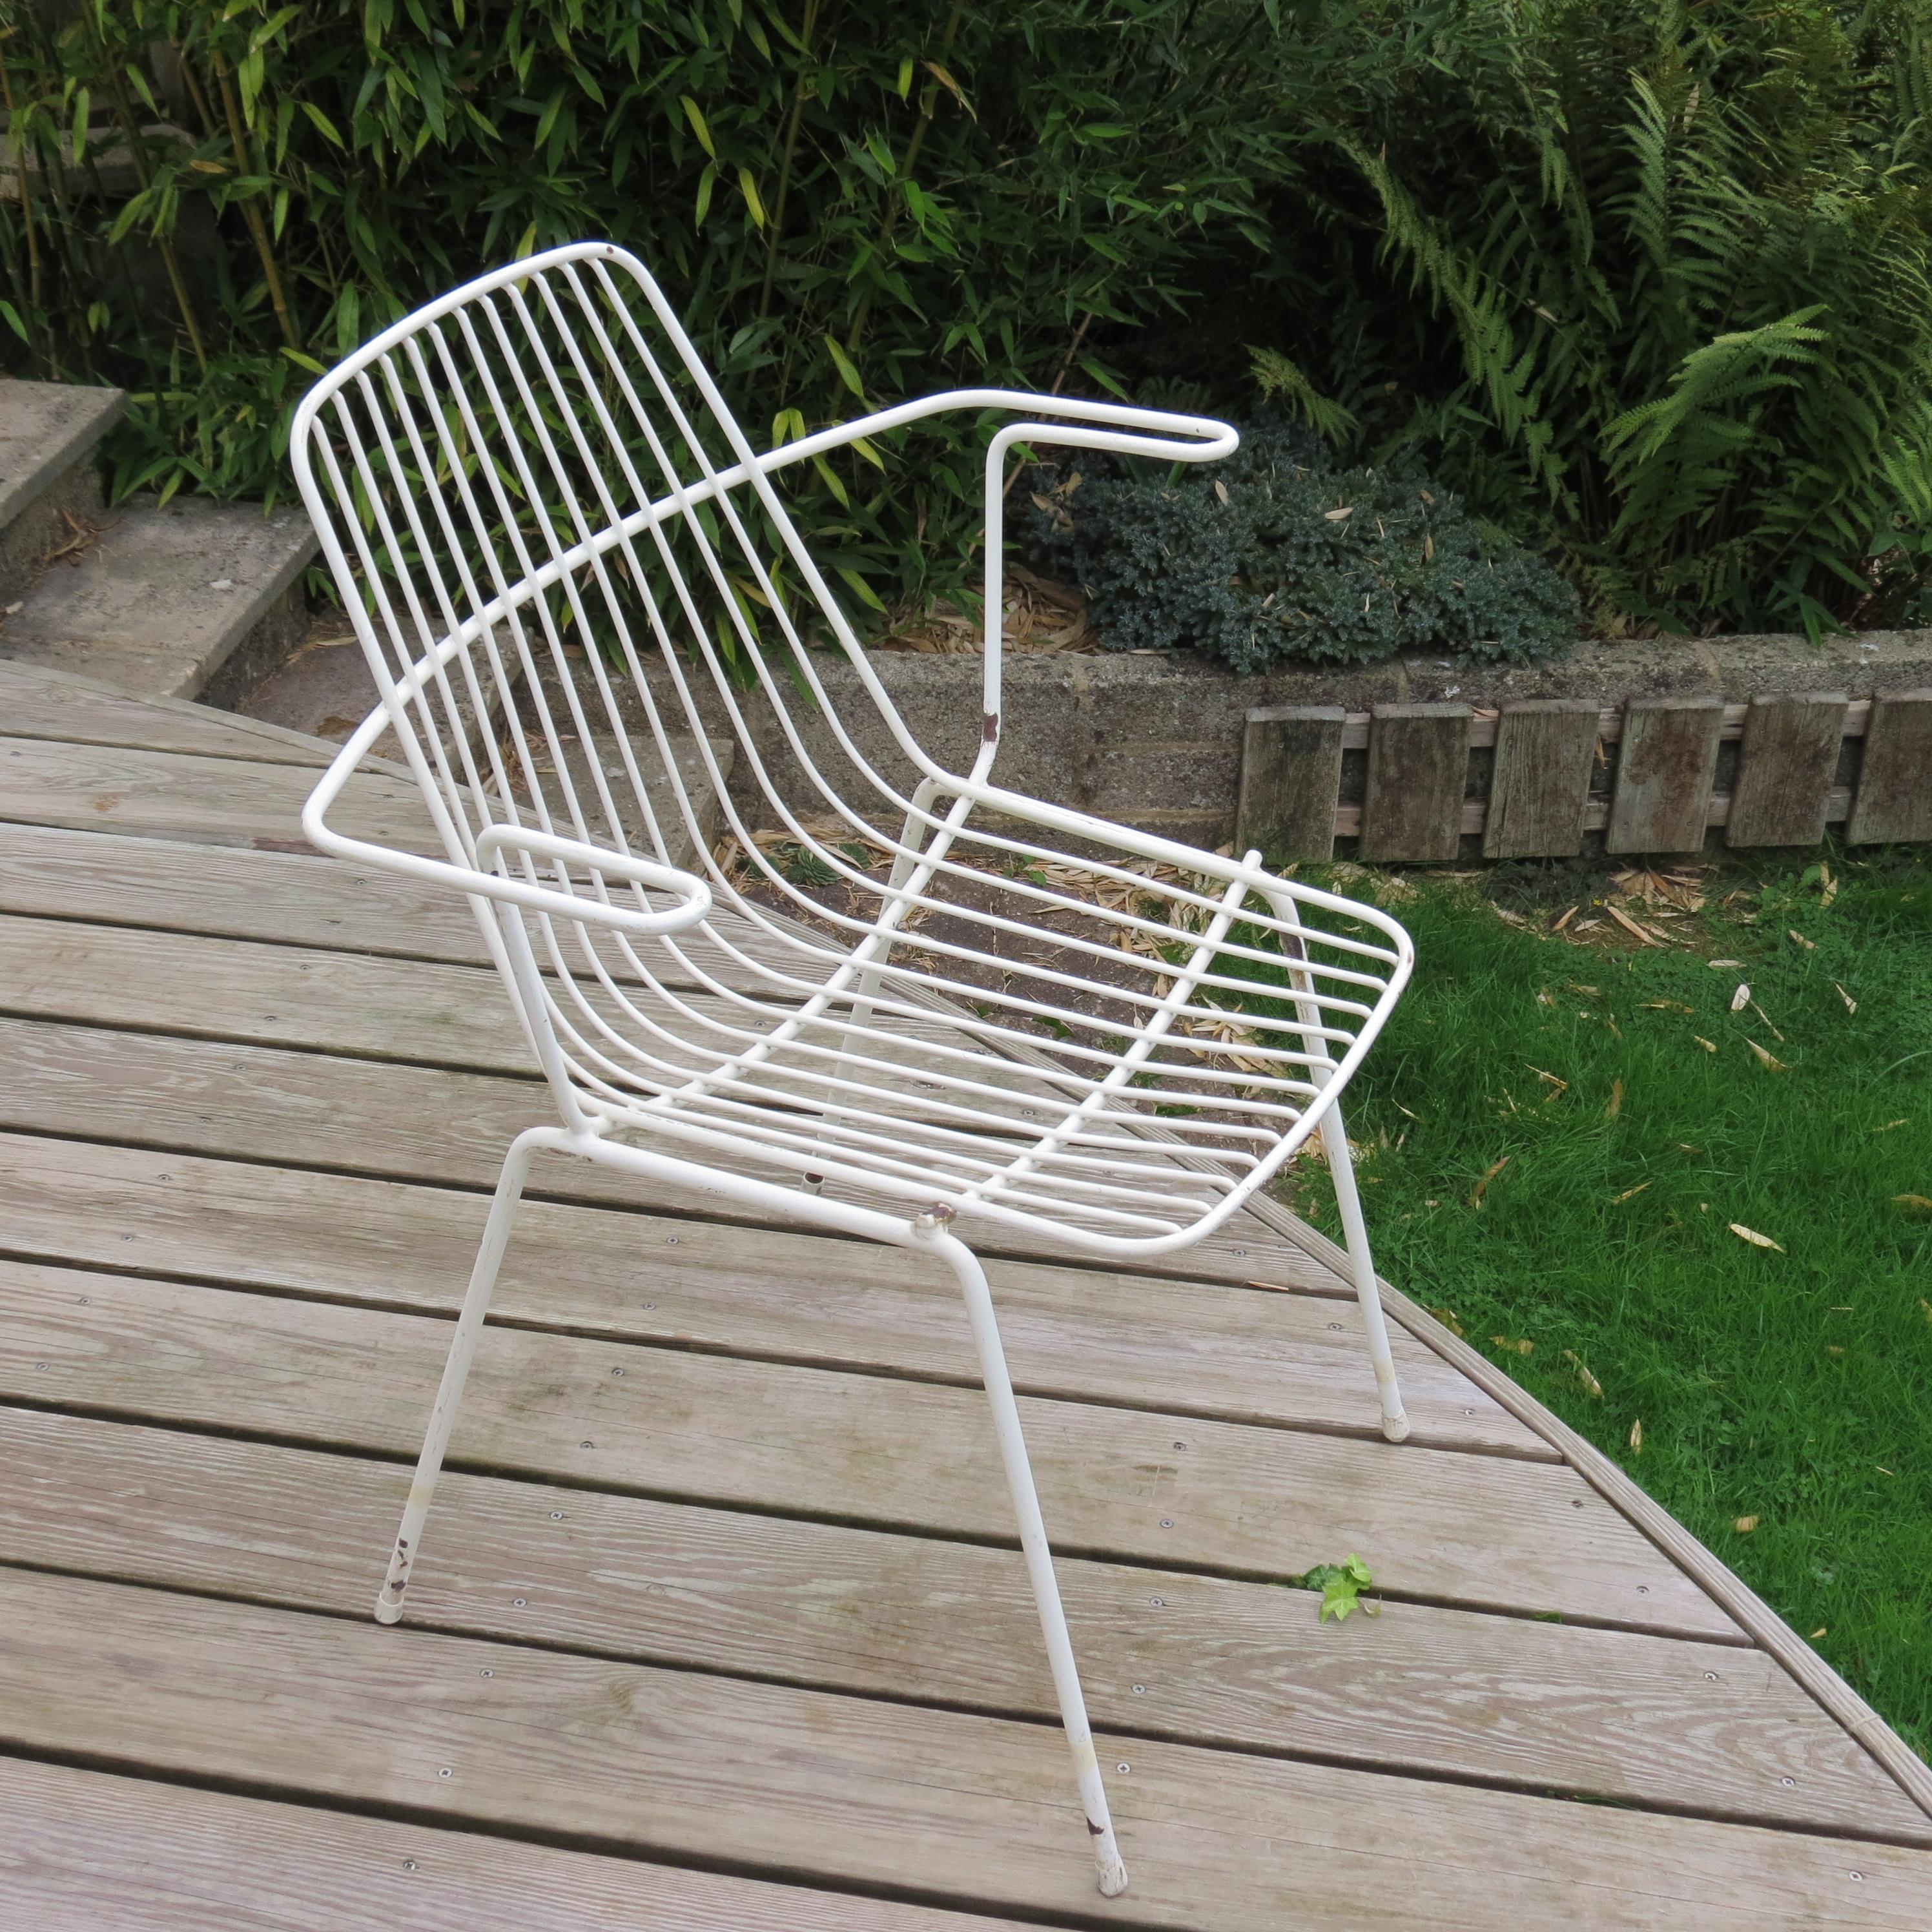 Good quality, very stylish midcentury garden chair. Wonderful garden chair, dates from the 1960s, made from plastic coated steel rod. In good vintage condition, retains the original white plastic coating, some loss to the plastic coating as can be